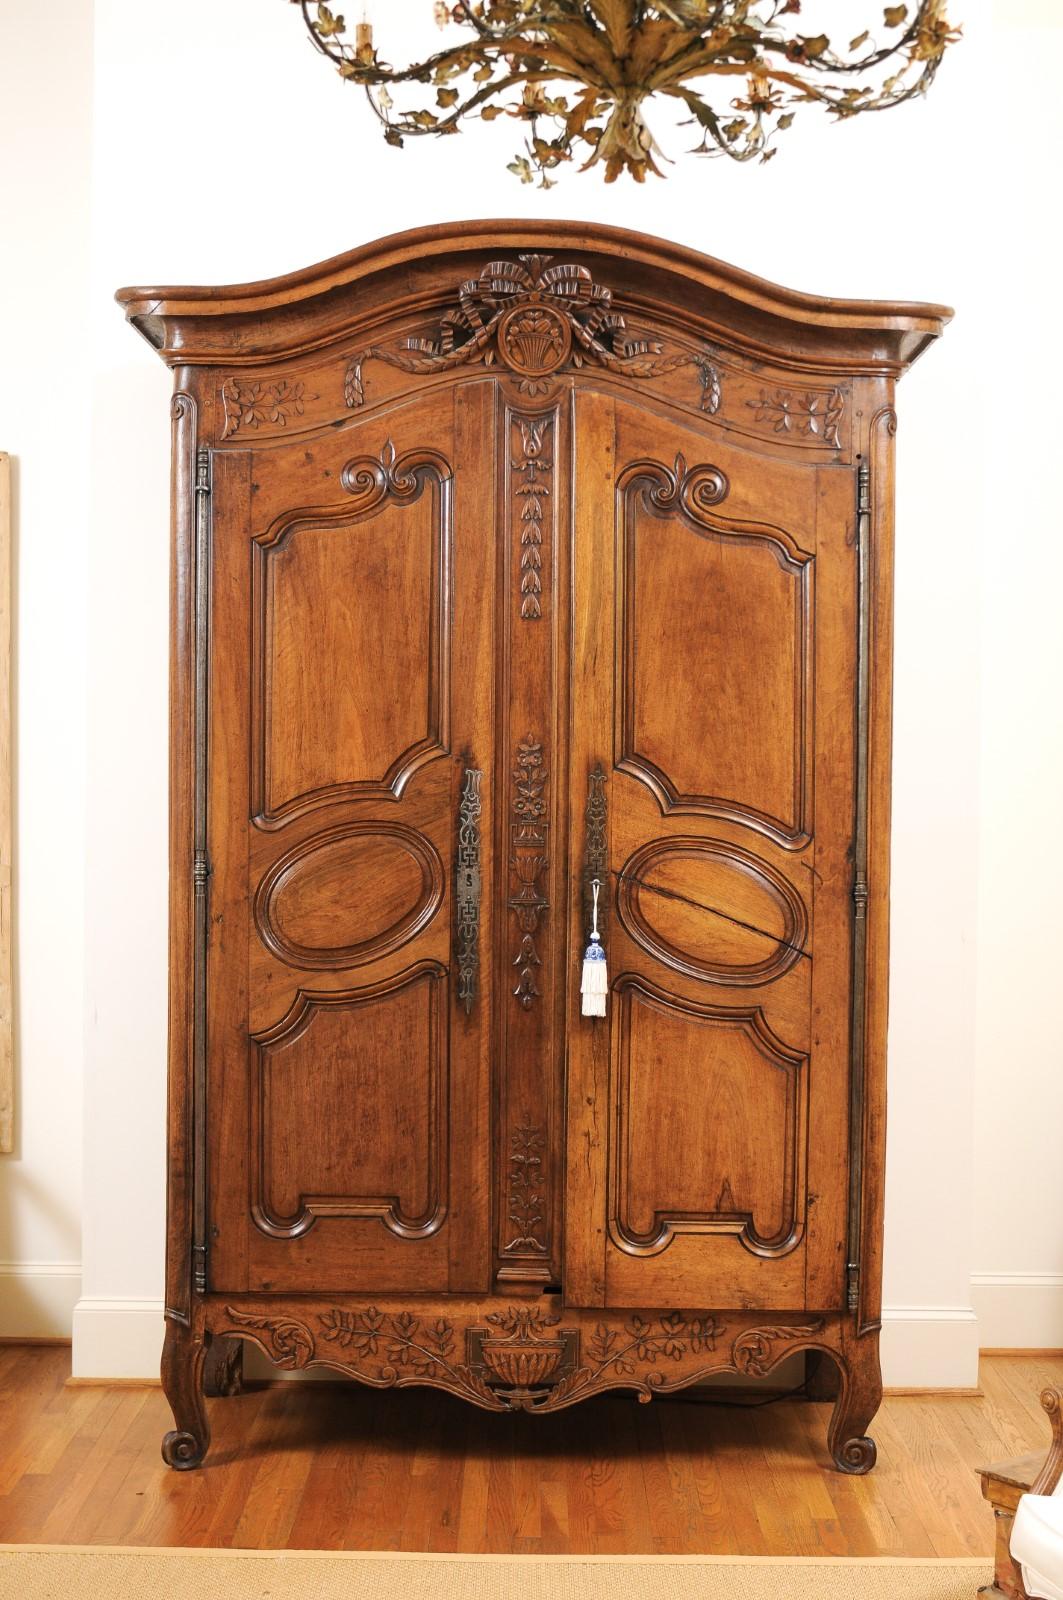 A French Louis XV period mid-18th century bonnet top walnut armoire from Nice, with ribbon-tied medallion and carved foliage. Handmade in Southern France during the reign of King Louis XV nicknamed the Bien-Aimé (the Beloved), this Niçoise walnut